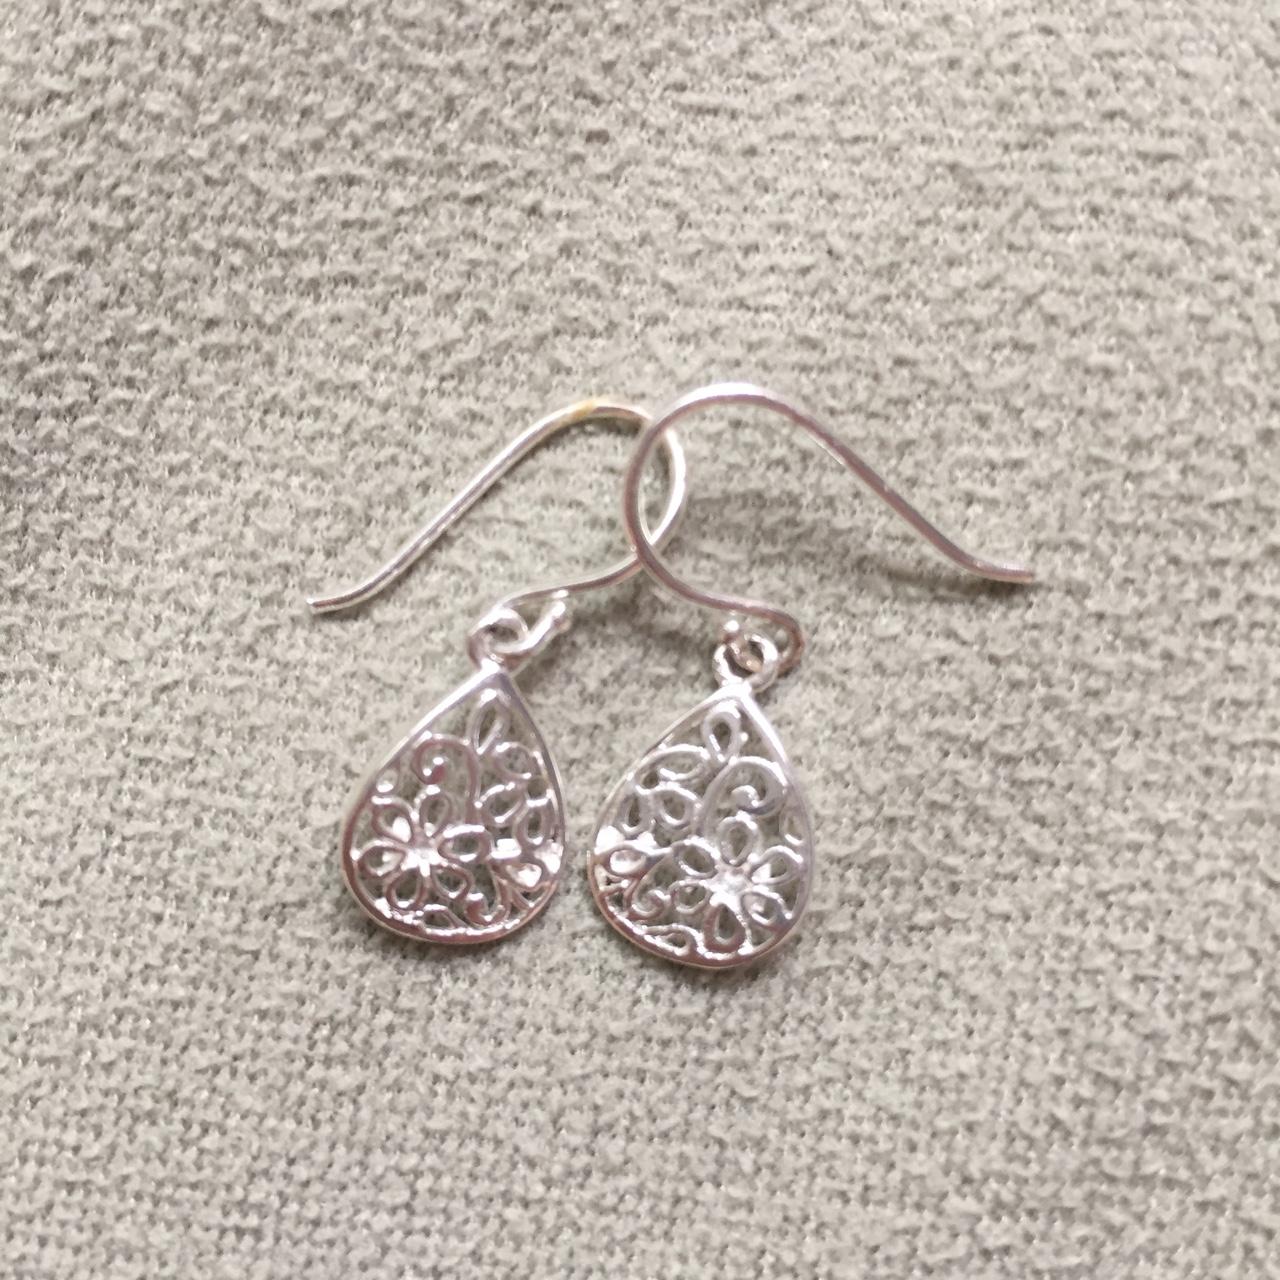 Product Image 1 - silver flower pear earrings, never